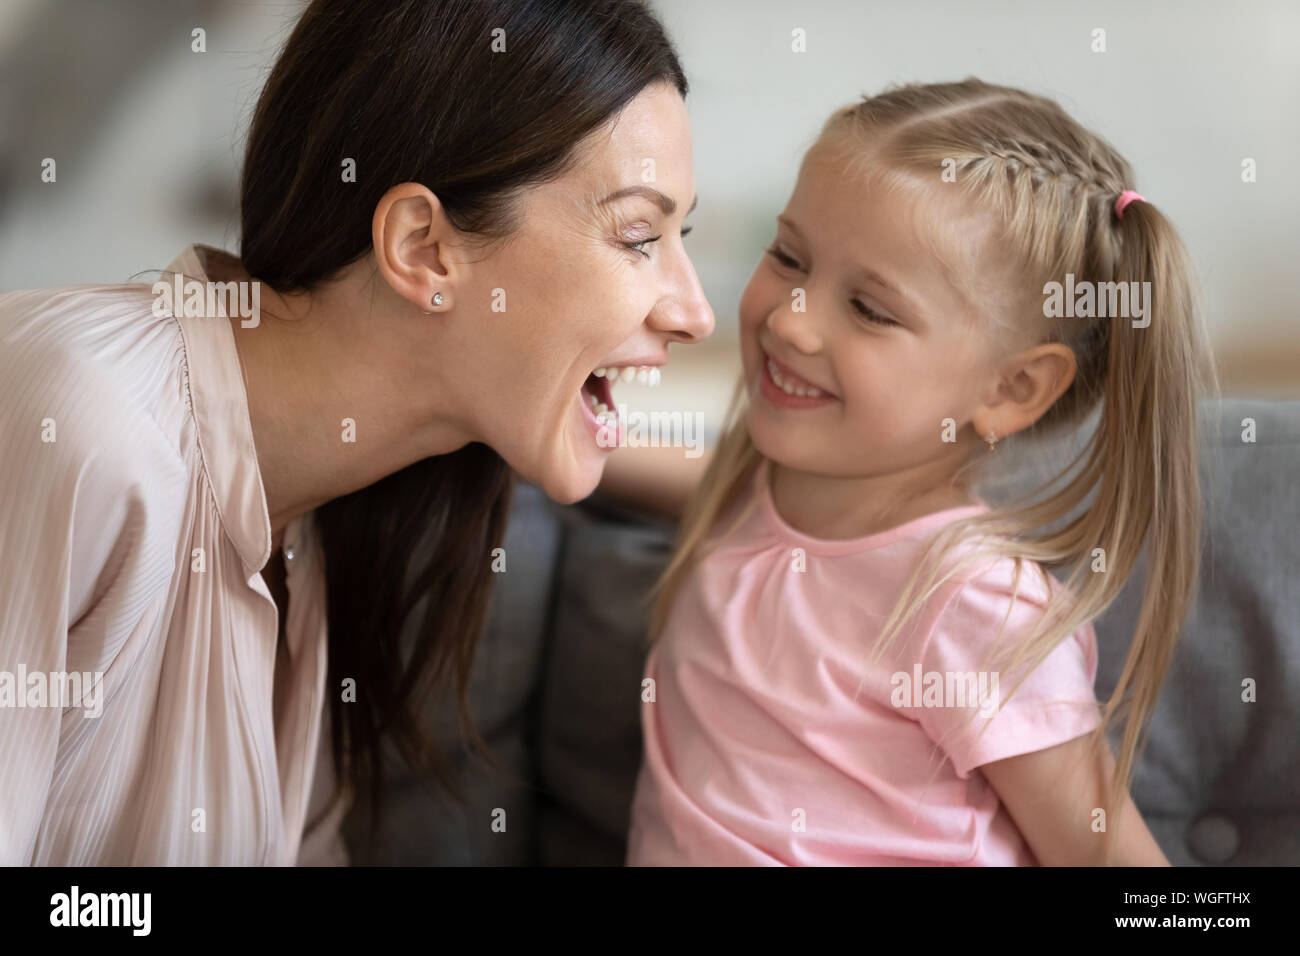 Woman and daughter having fun playing at home Stock Photo